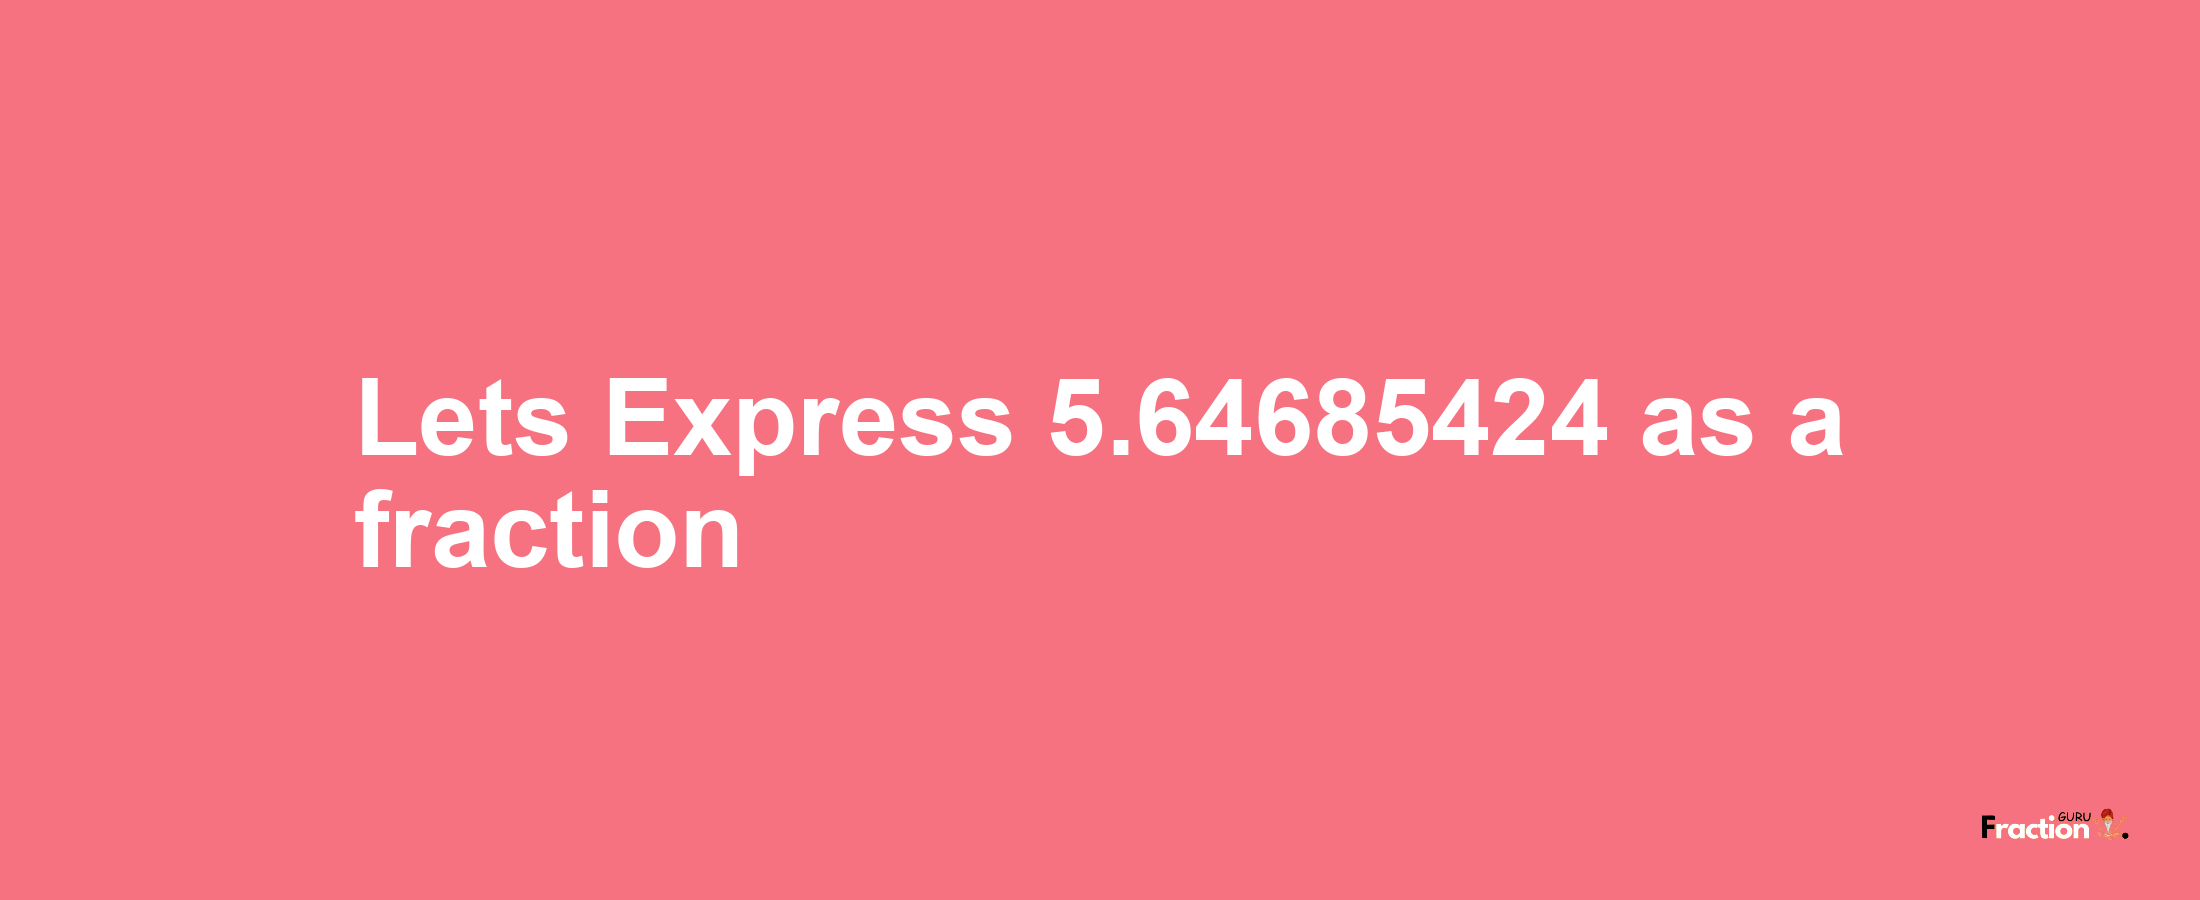 Lets Express 5.64685424 as afraction